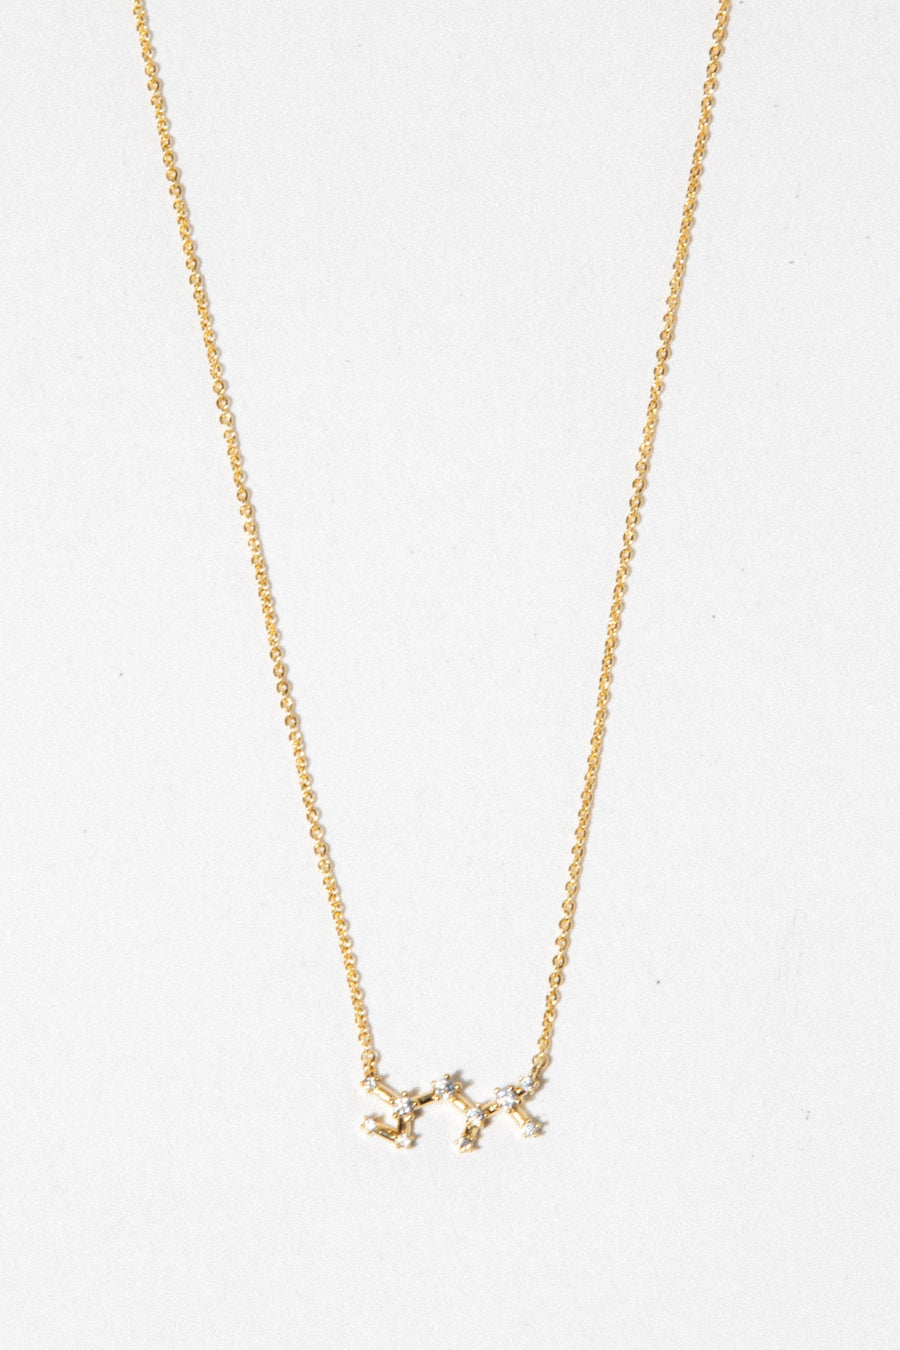 charis Jewelry Constellation Necklace